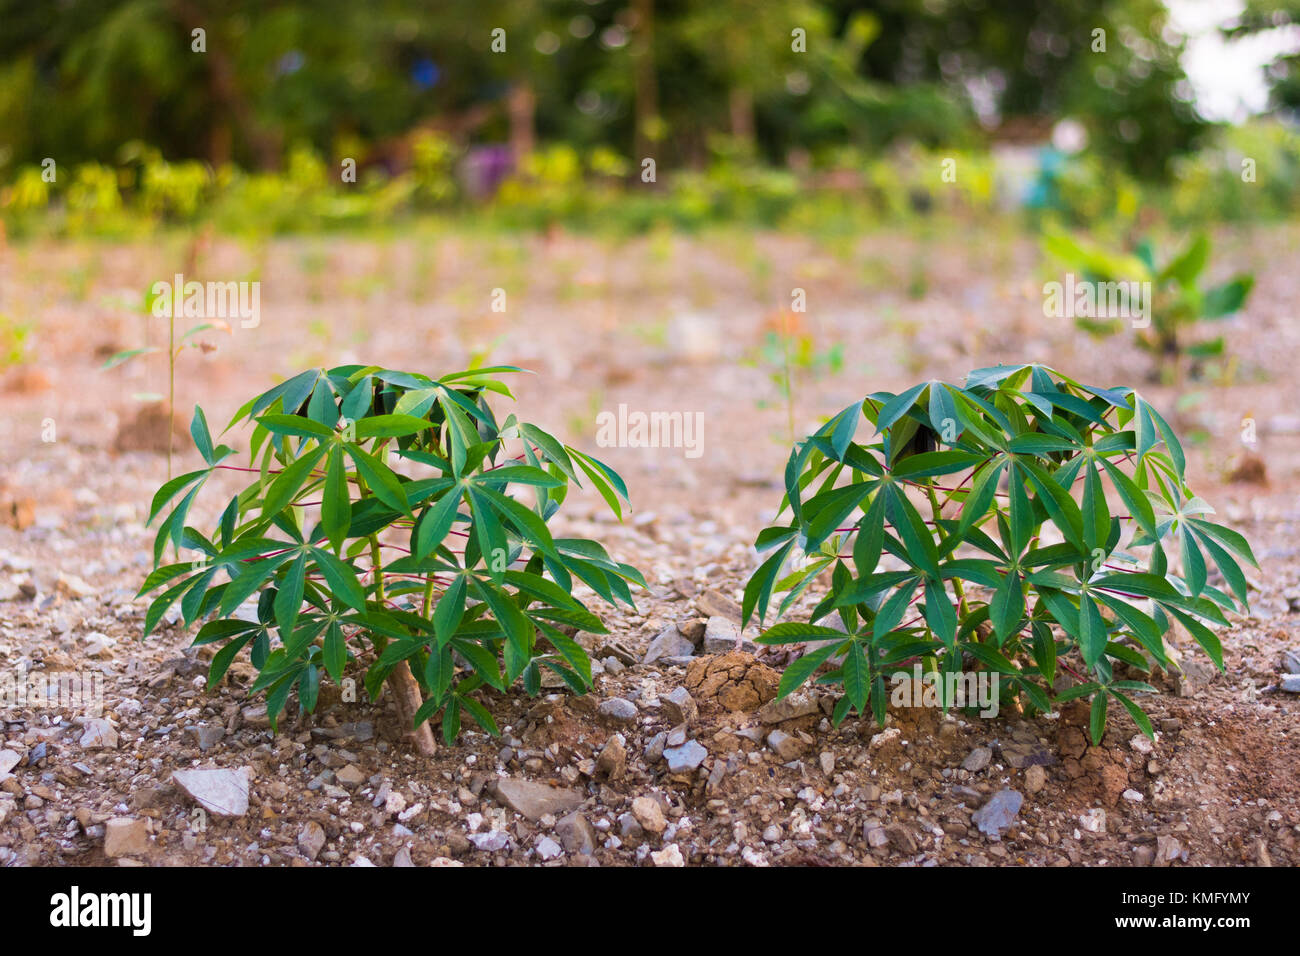 Young plants growing Stock Photo